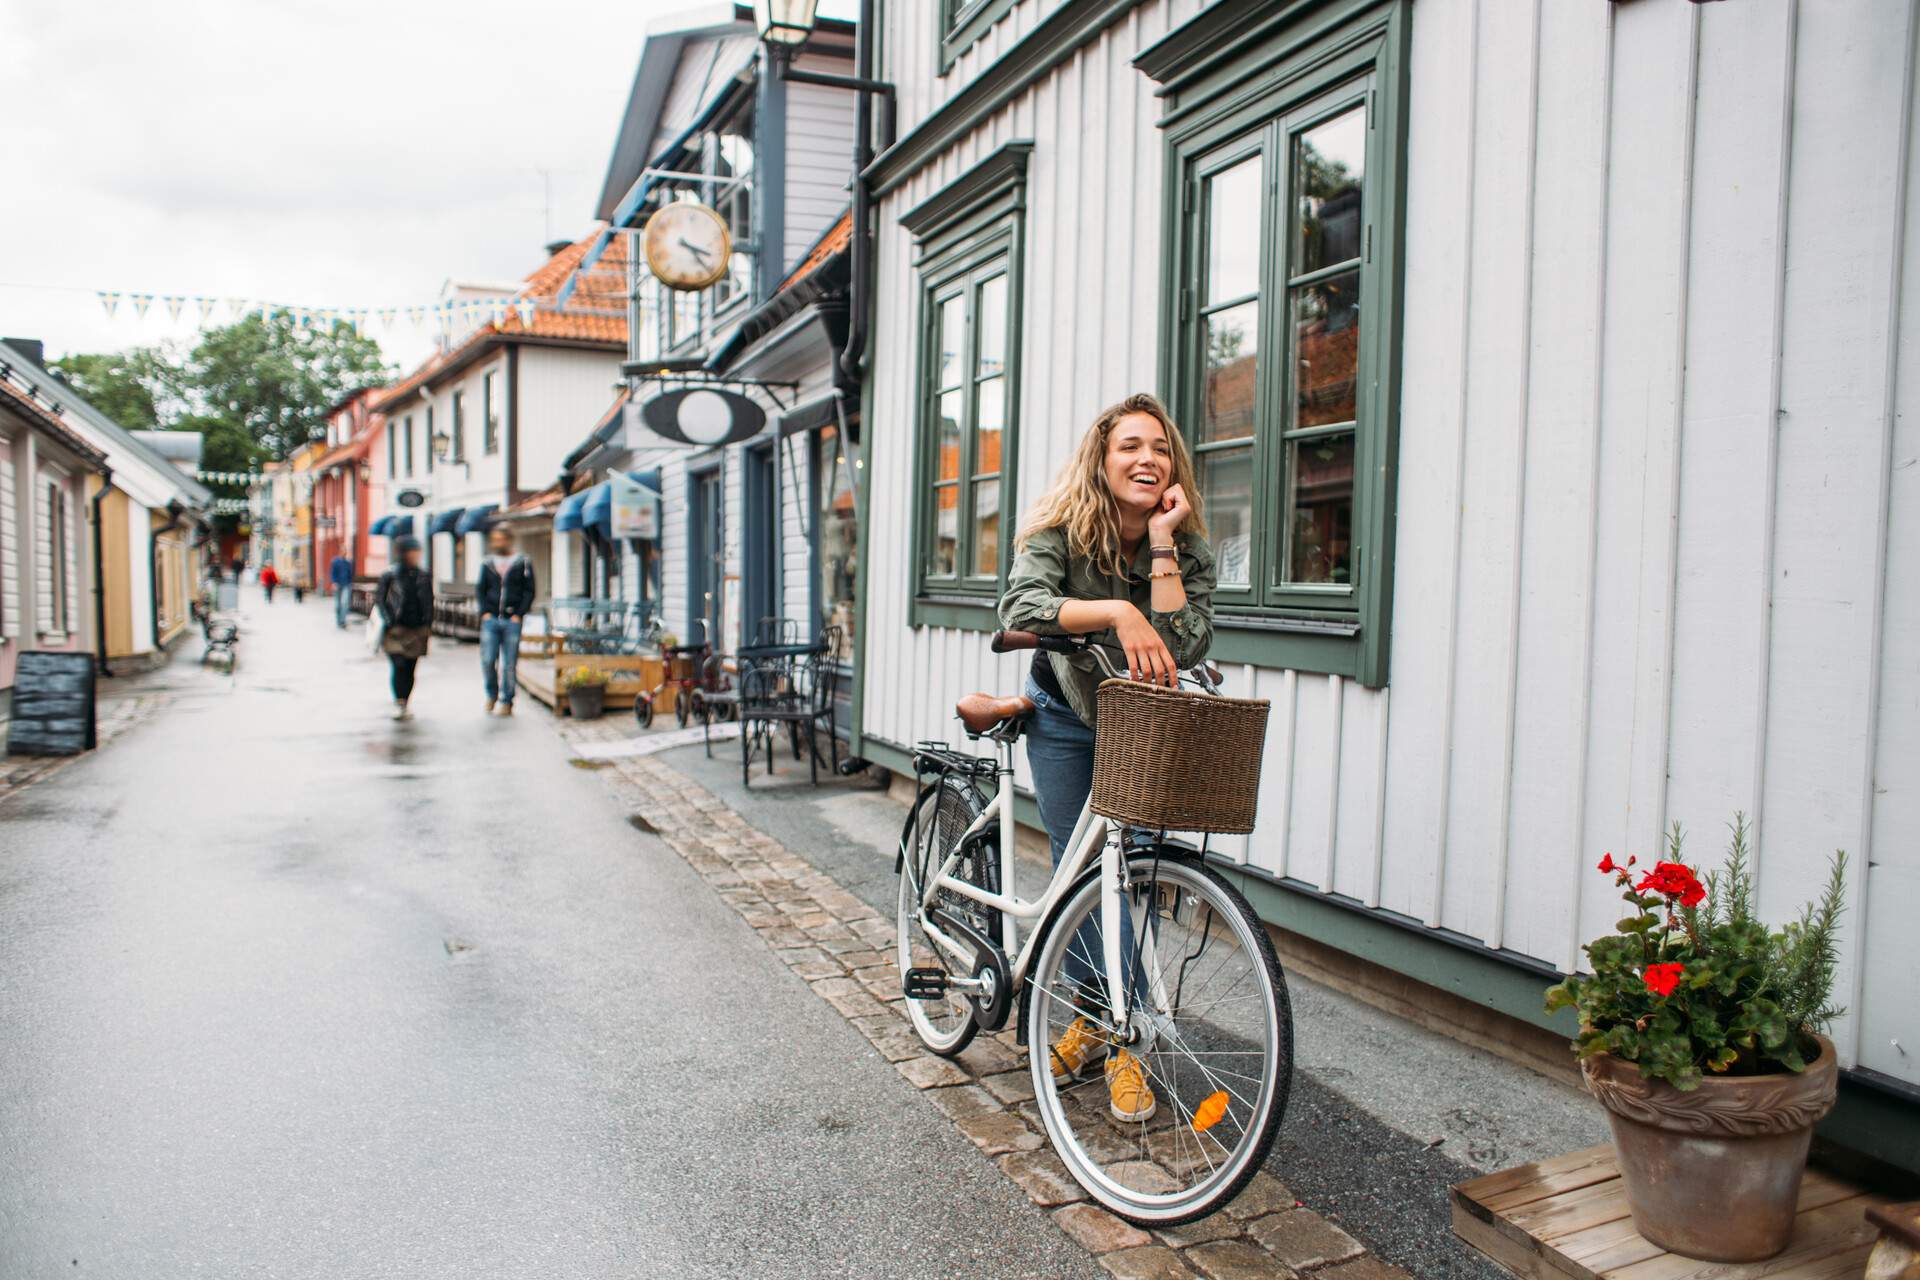 A woman standing with her bike on a rainy day in a street with wooden houses